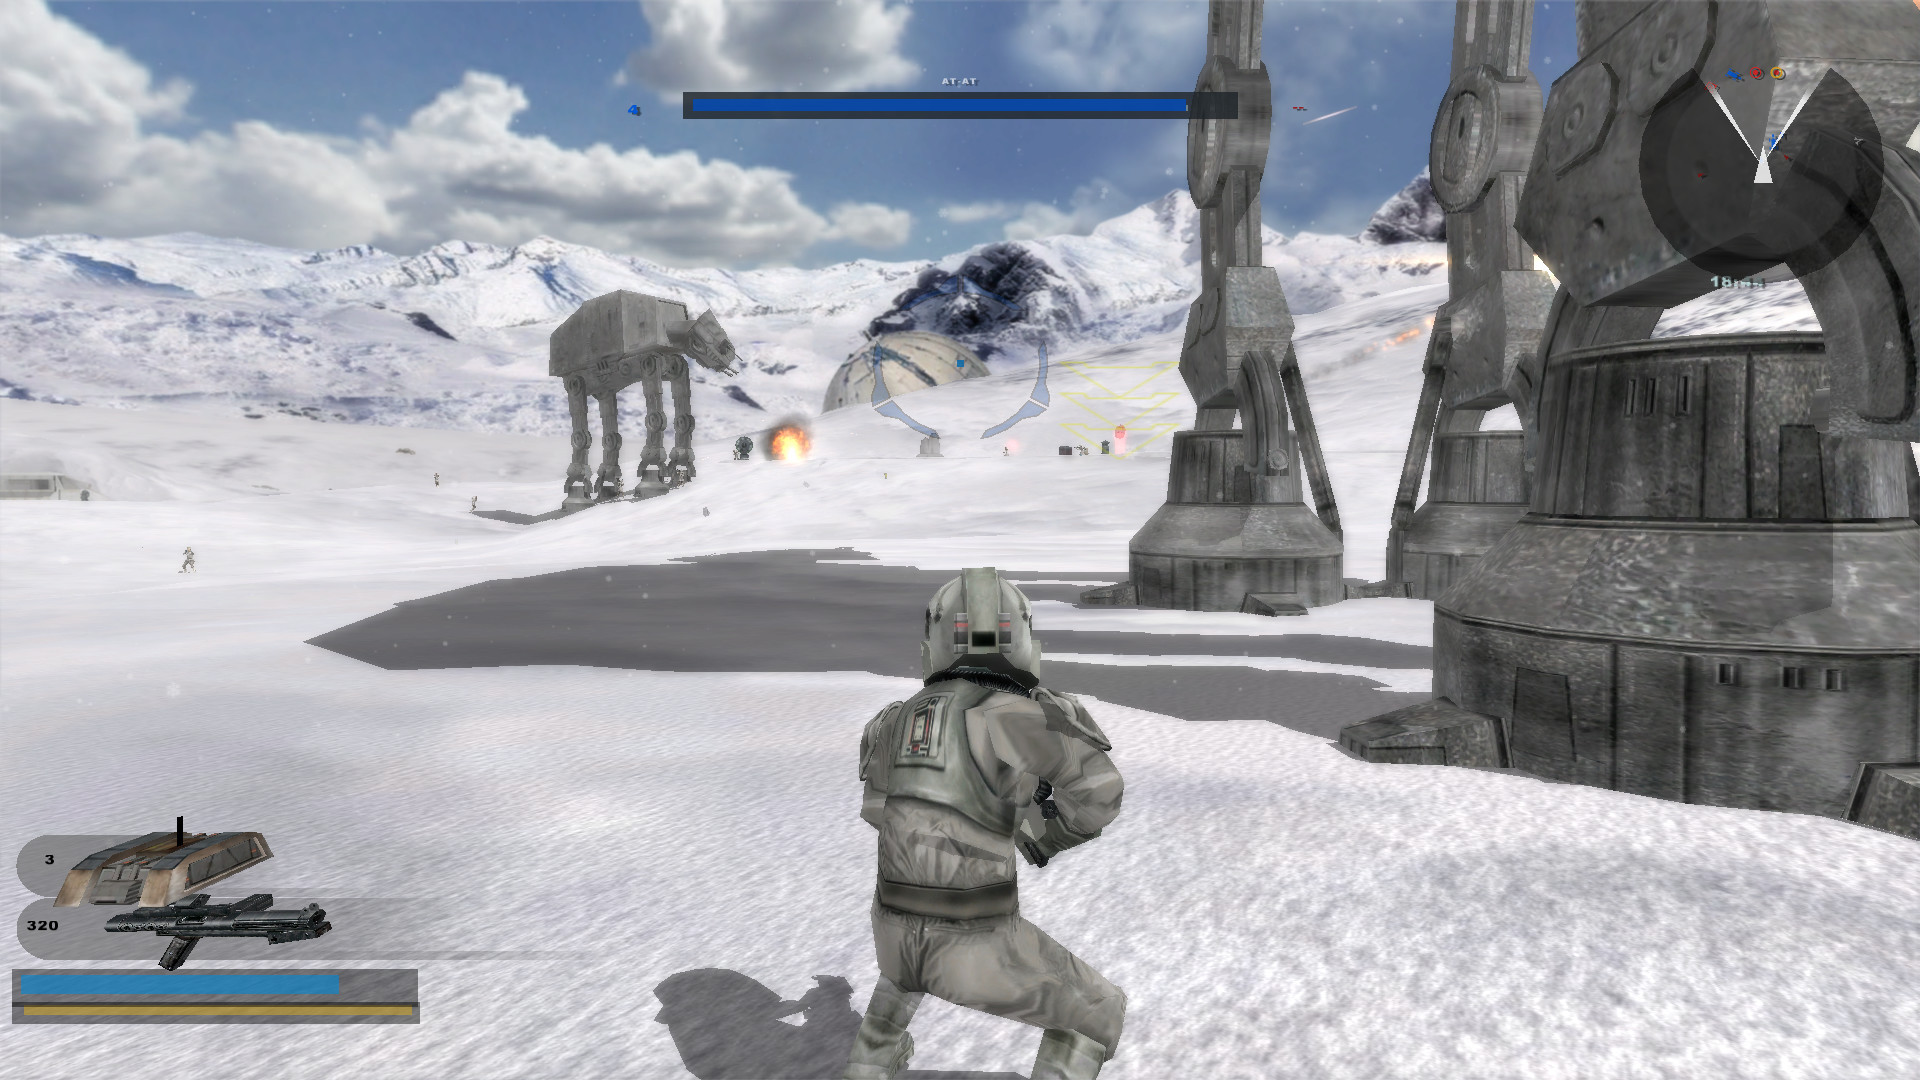 The Original Star Wars Battlefront 2 Is Getting Official Online Play Again  on Steam and GoG